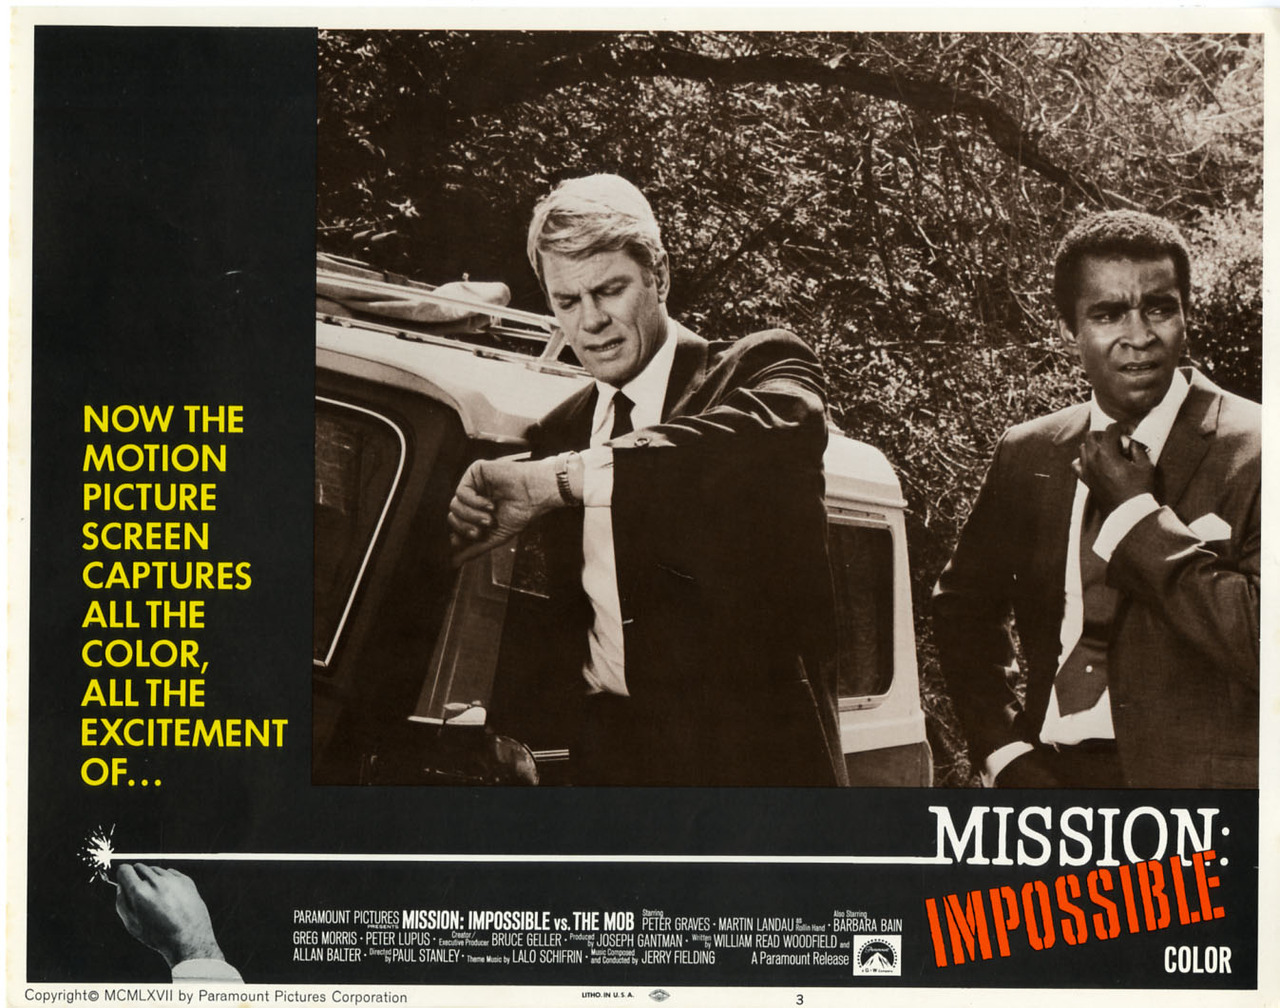 Mission: Impossible vs. the Mob, US lobby card #3. 1967